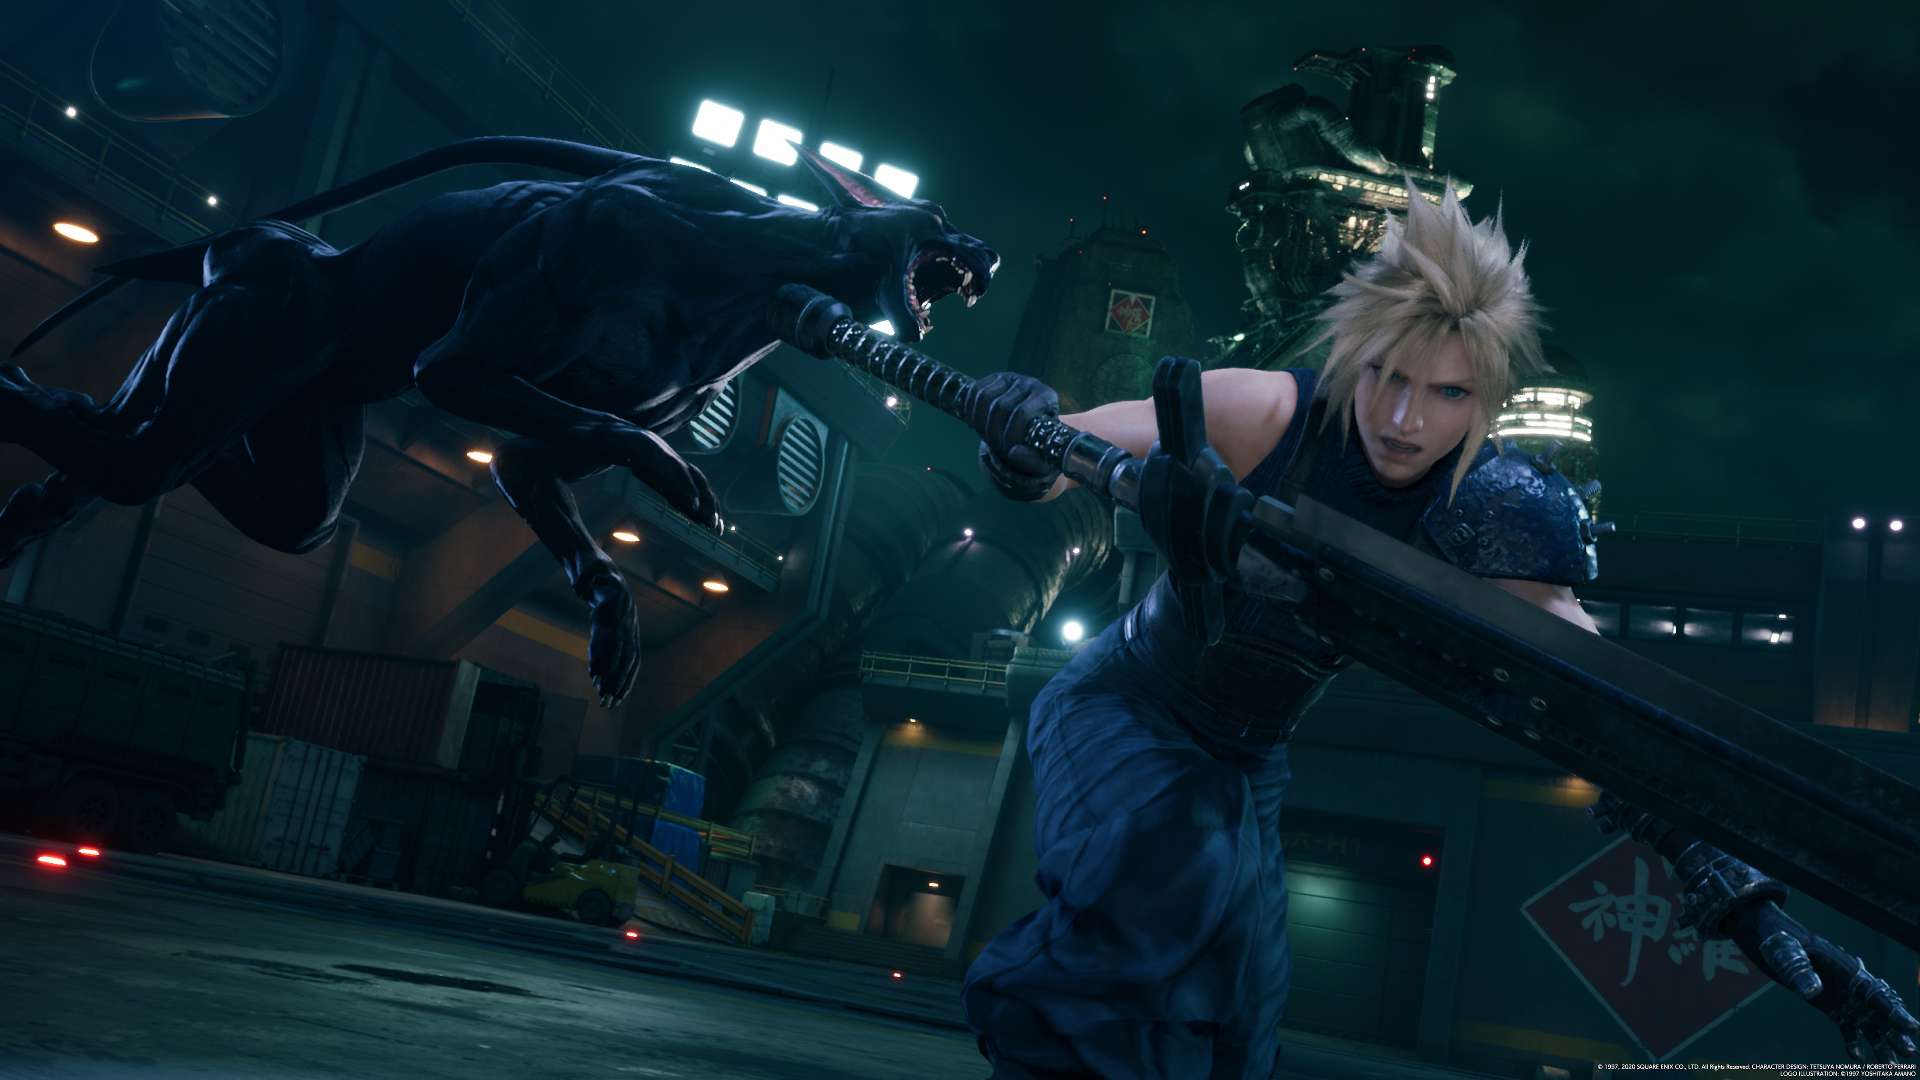 Final Fantasy VII Remake  PS4 Review for The Gaming Outsider